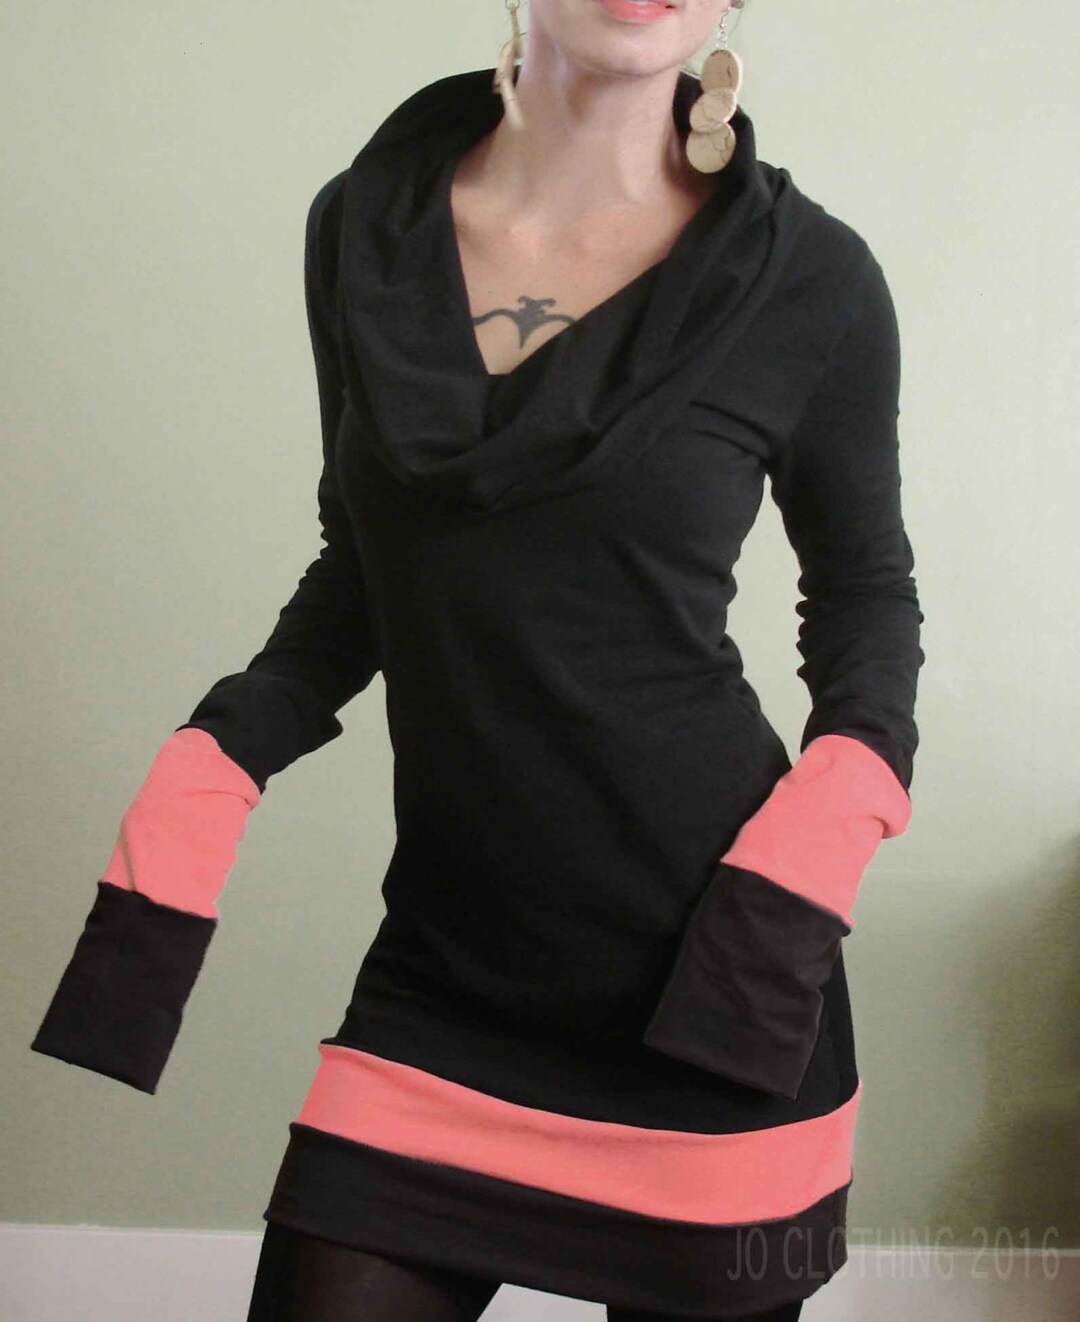 Cowl Tunic Dress /extra Long Sleeves Black With Coral Pink - Etsy